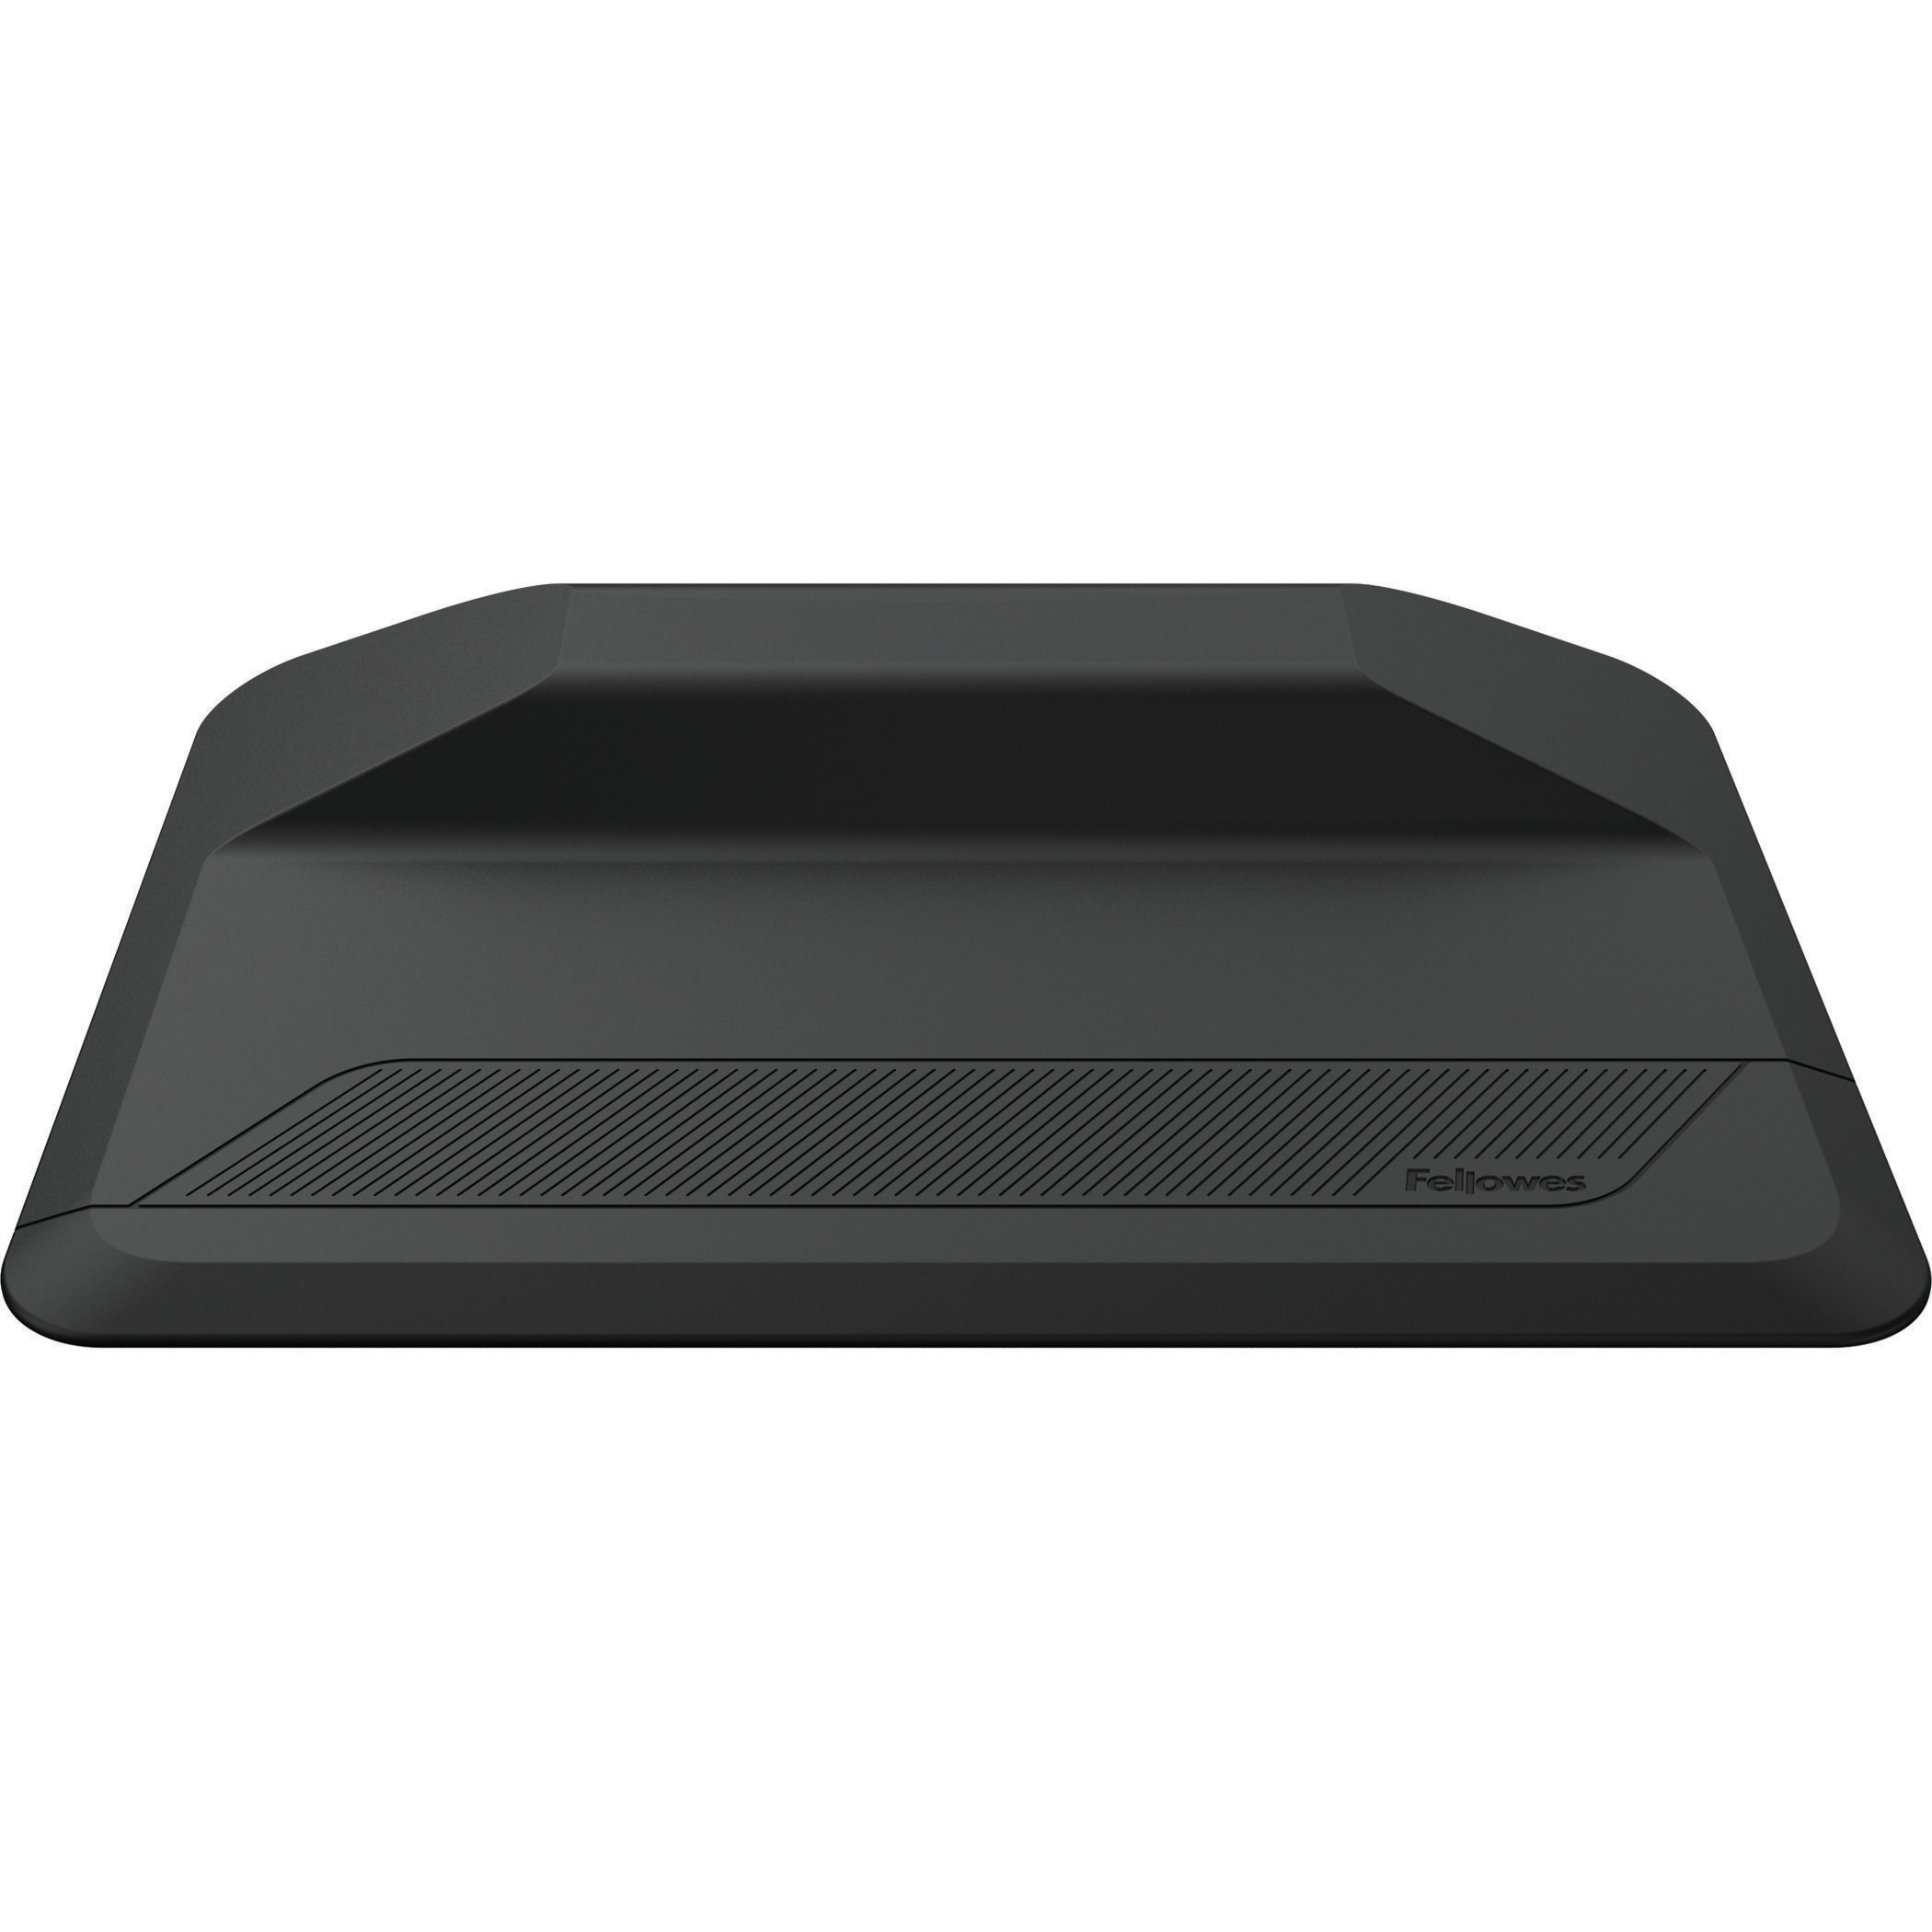 fellowes Fellowes Activefusion Anti-fatigue Sit Stand Floor Mat Black - 8707101 8707101 - AD01